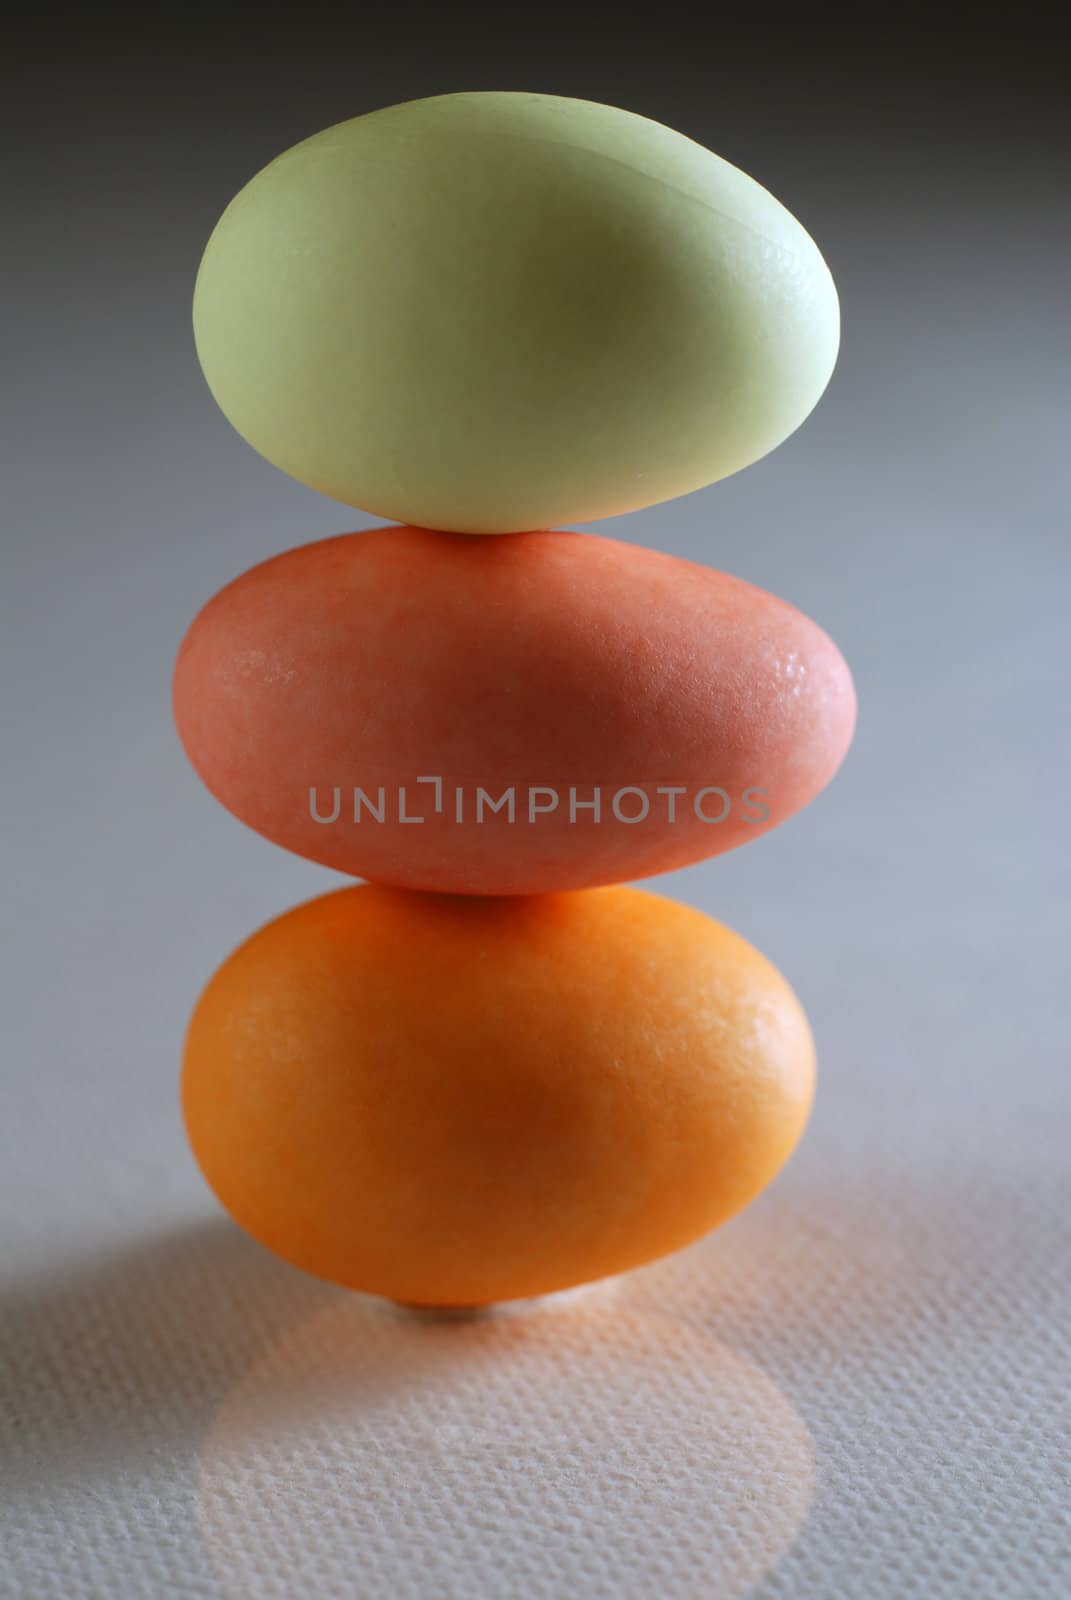 Three candy eggs stacked on top of one another